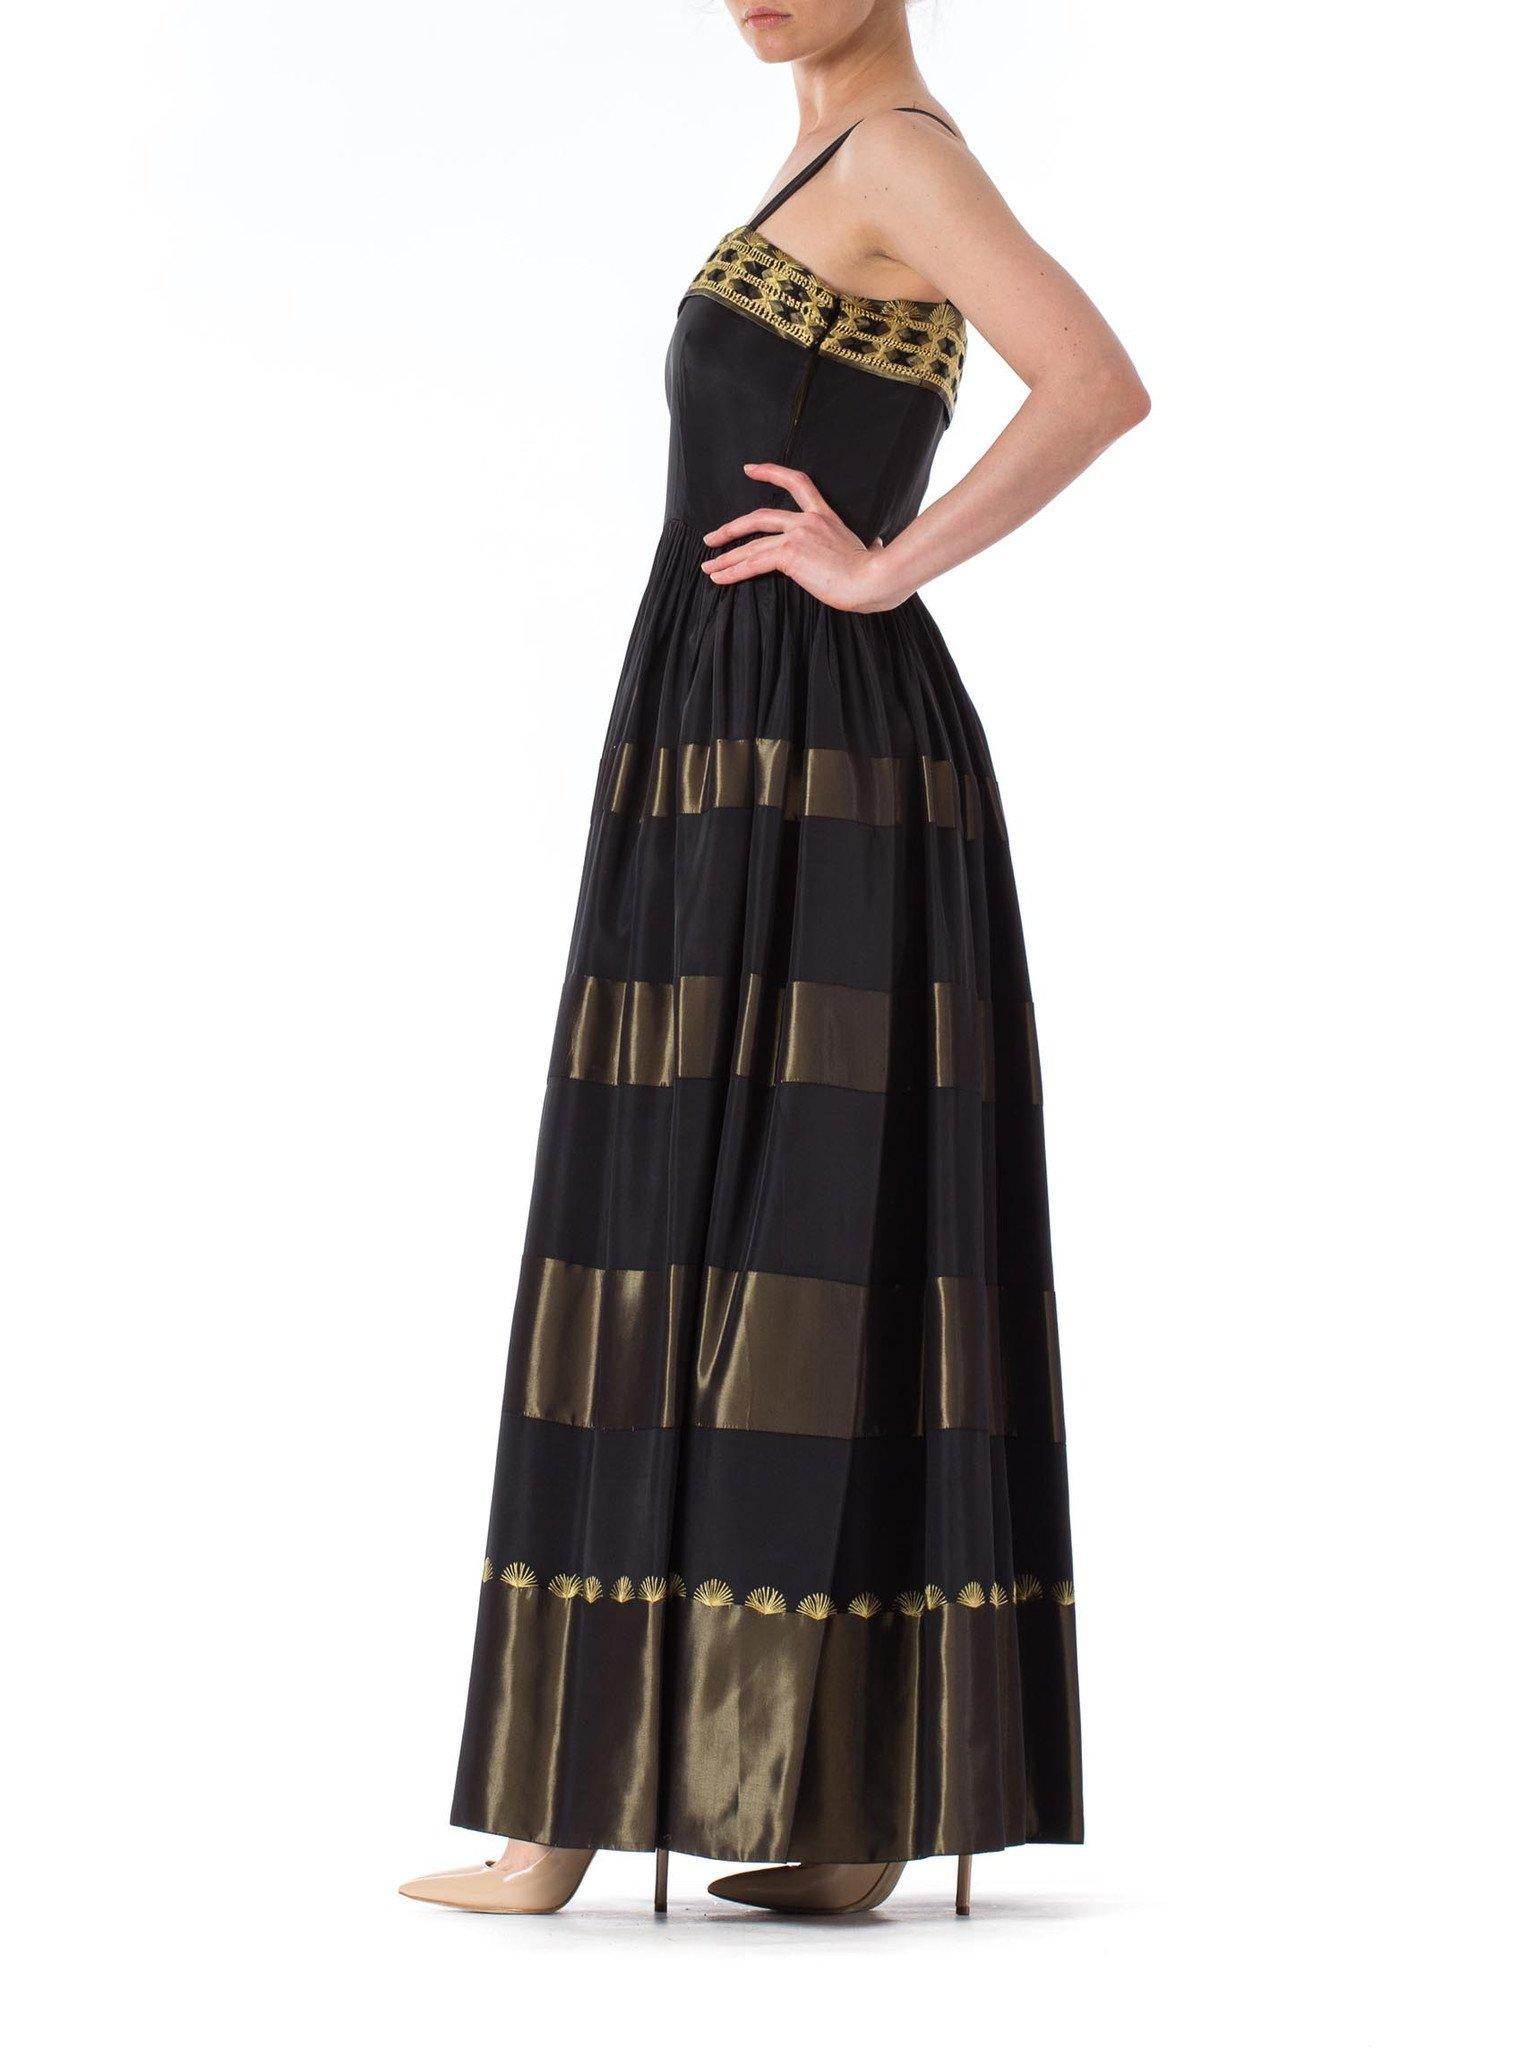 1940S Black & Gold Rayon Taffeta Ball Gown With Hand Embroidered Hem Bodice In Excellent Condition For Sale In New York, NY